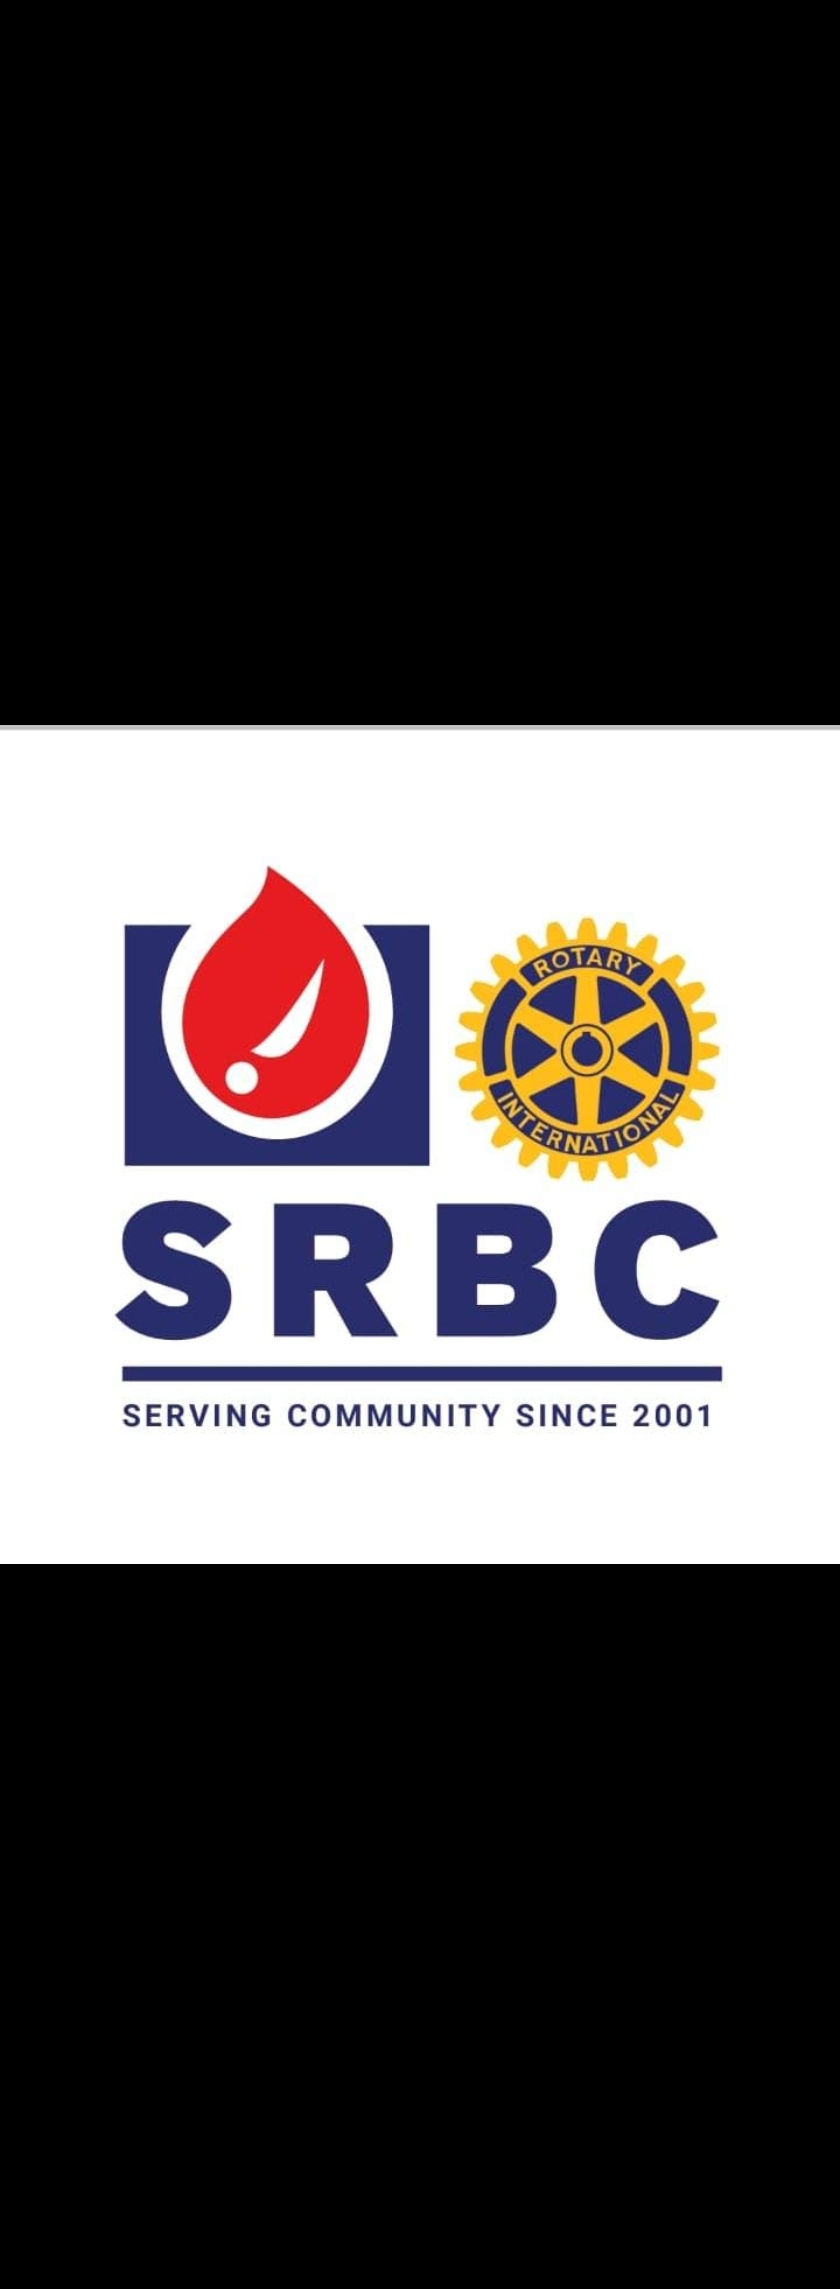 Rotary Blood Centre